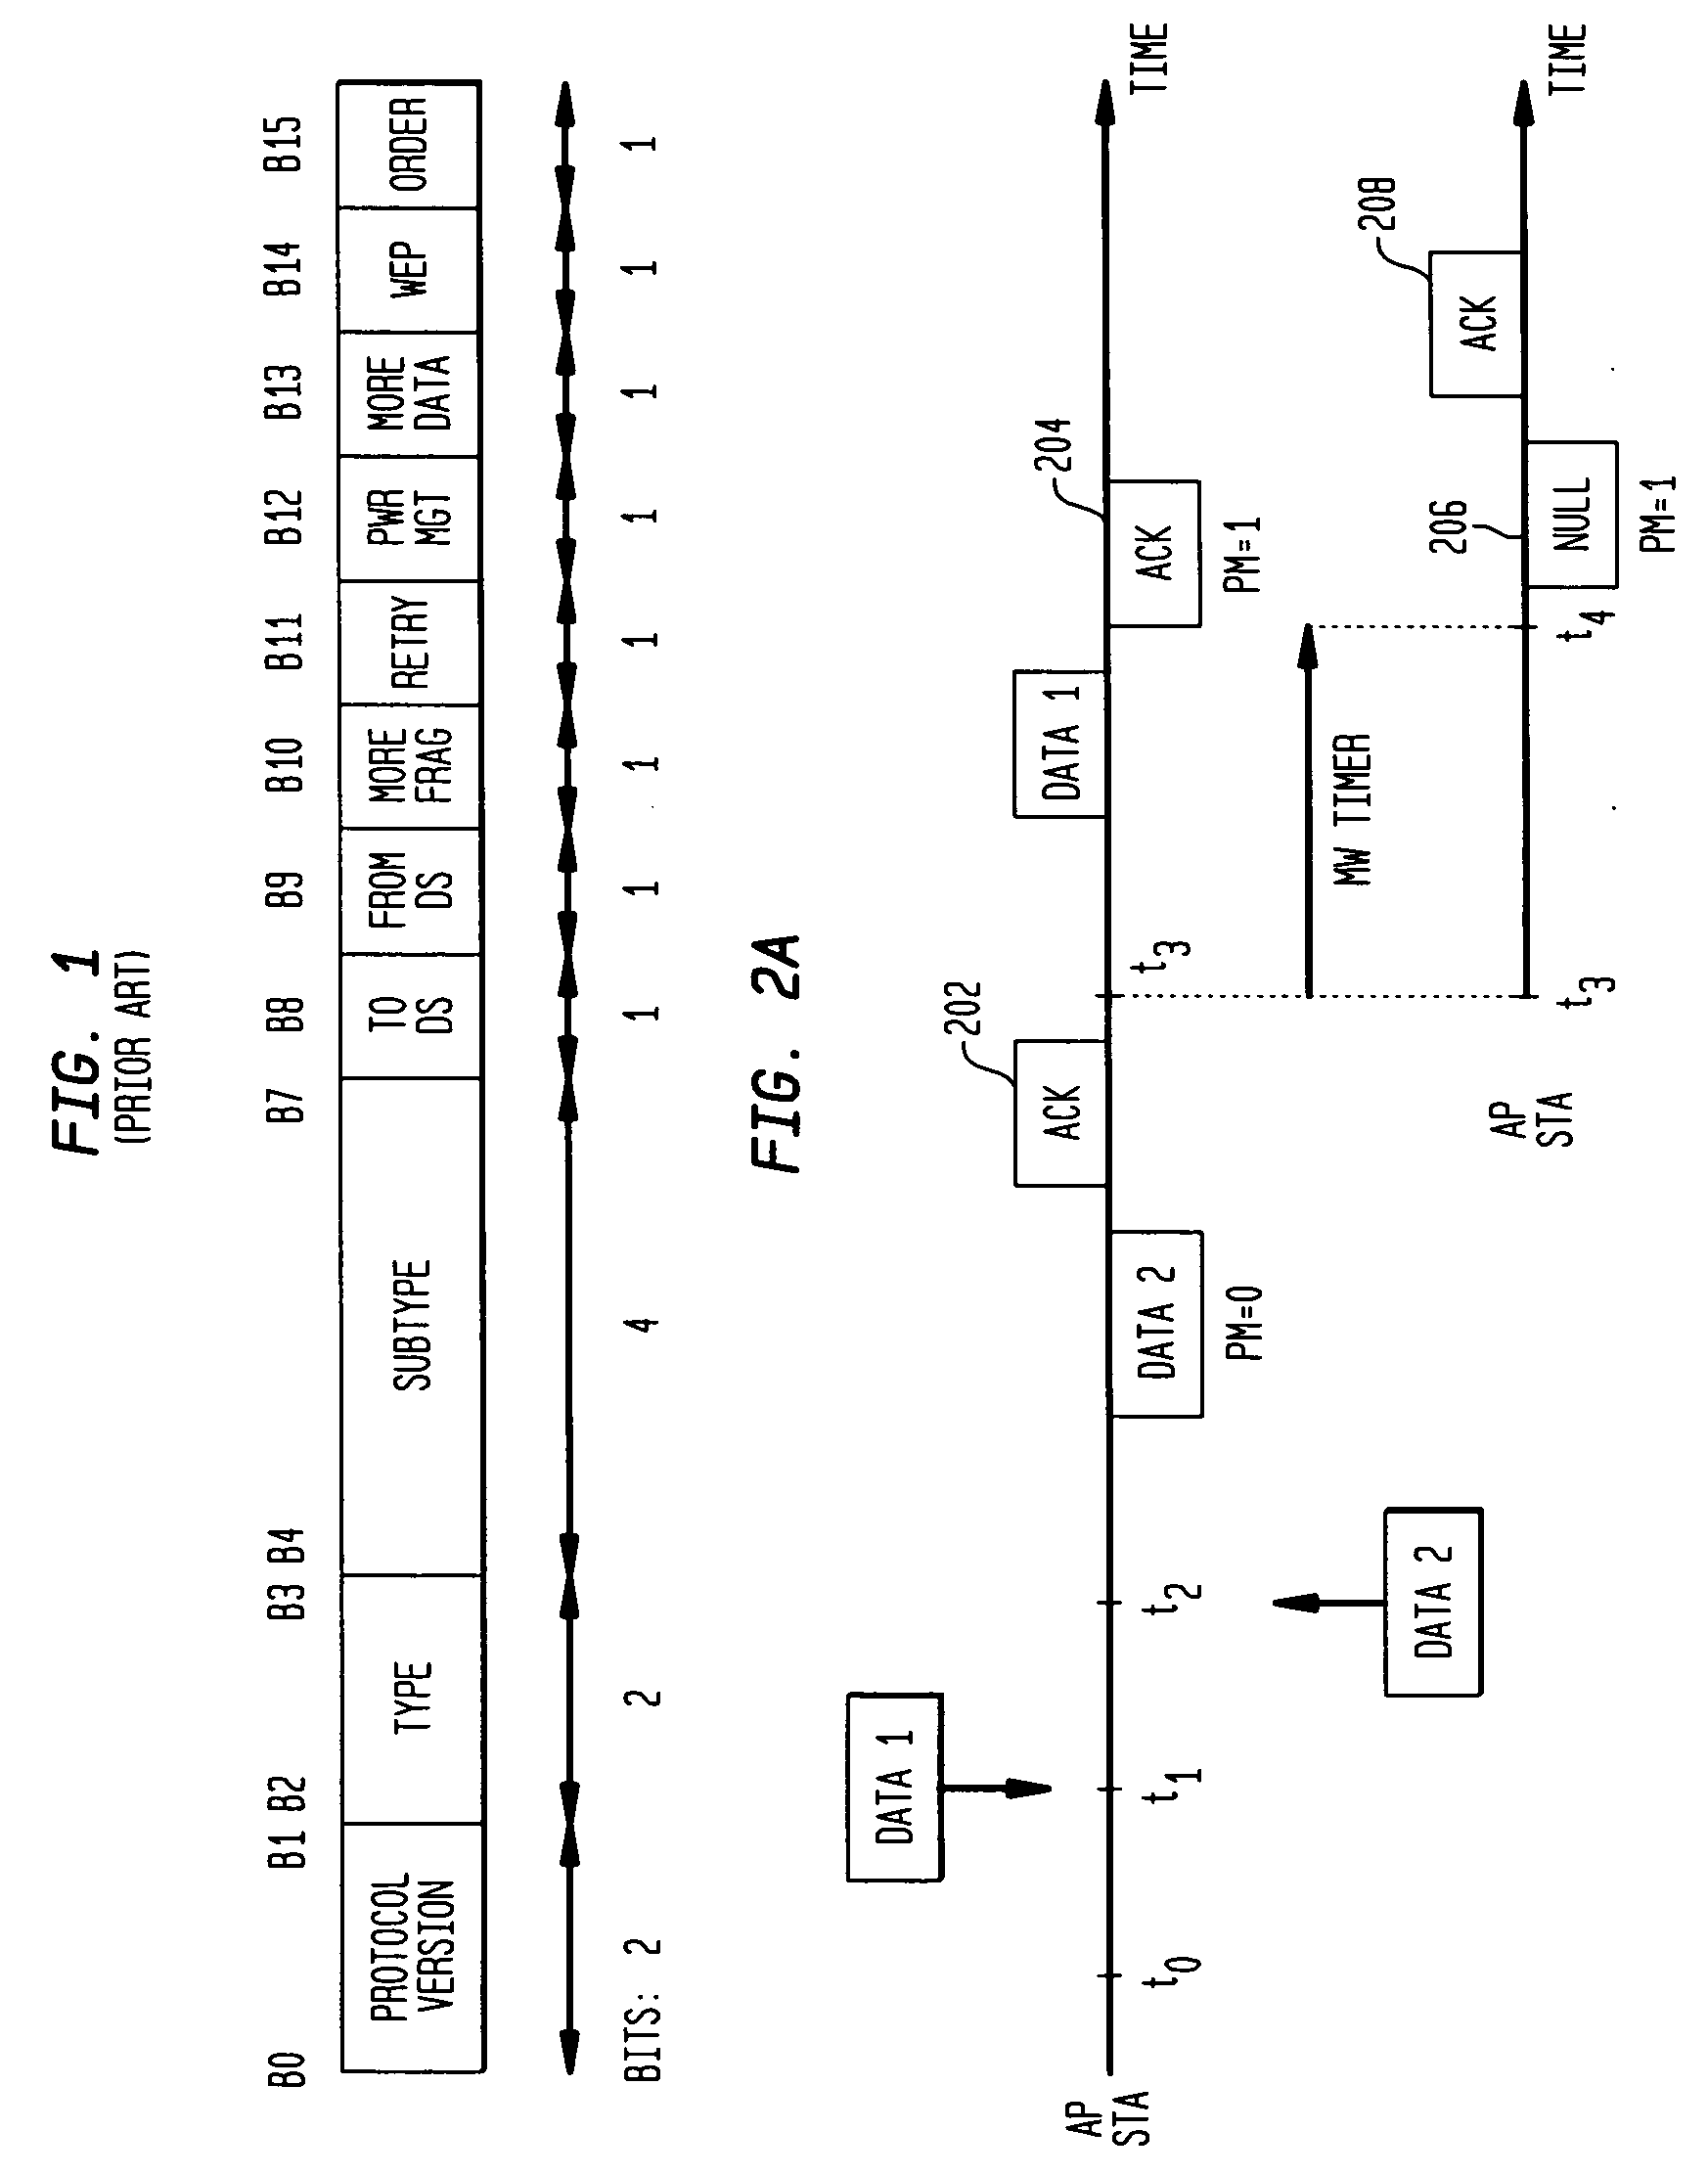 Power management method for creating deliver opportunities in a wireless communication system